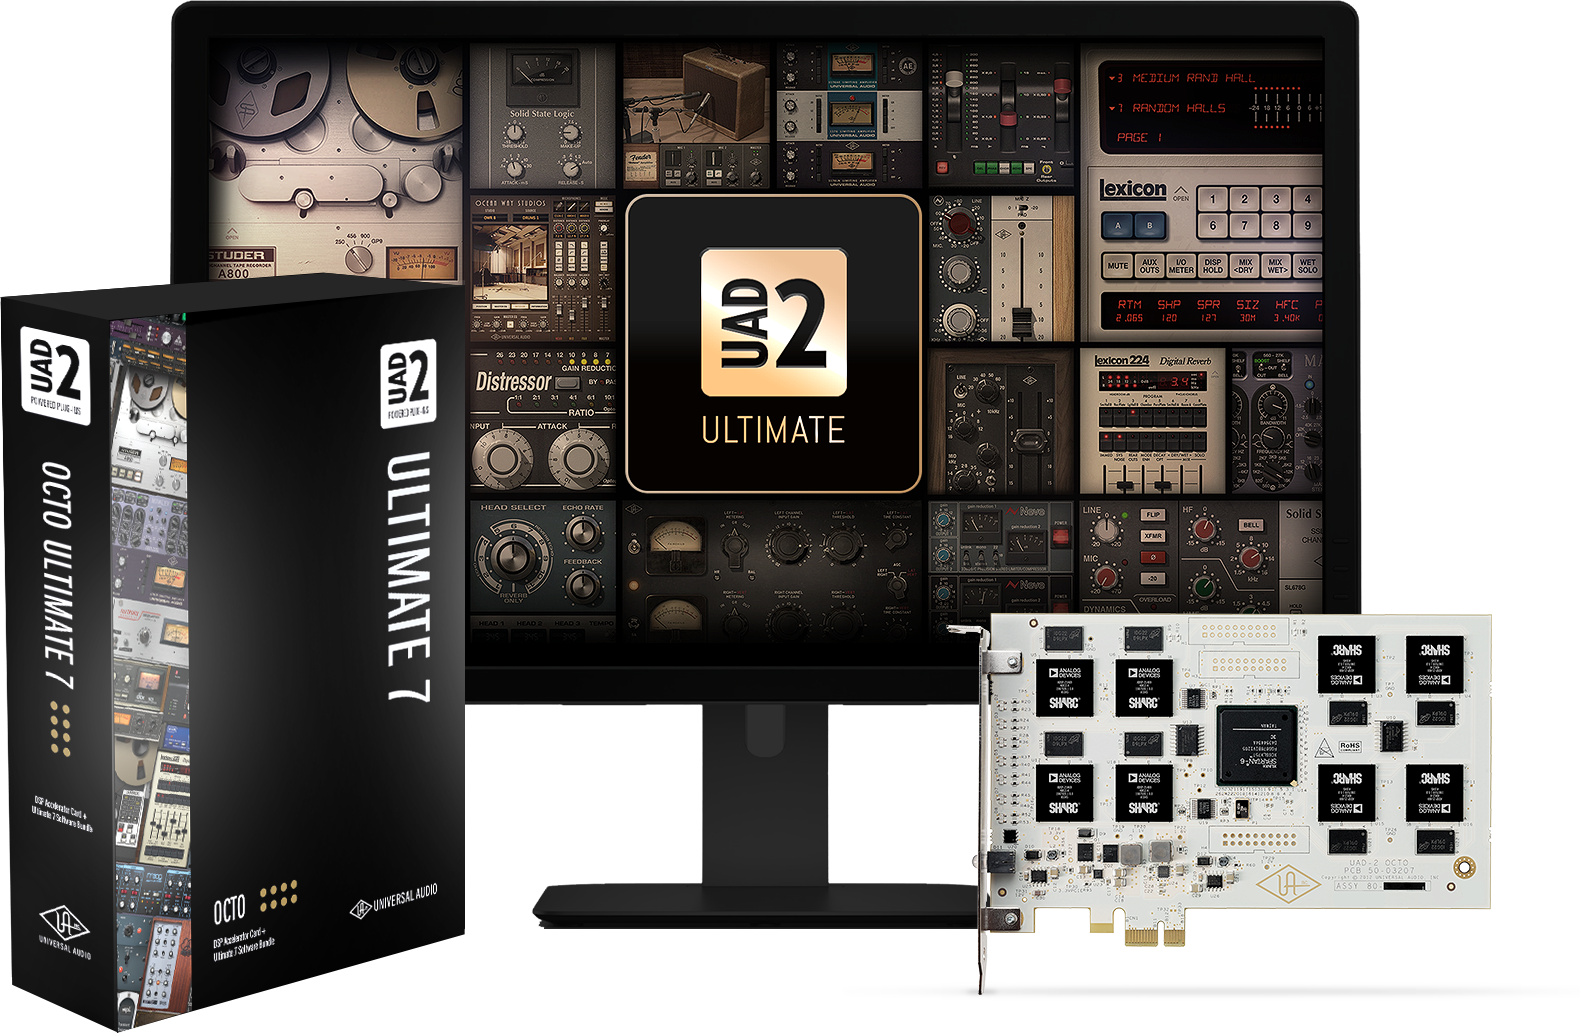 Universal Audio Uad-2 Pci-e Octo Ultimate 7 - Others formats (madi, dante, pci...) - Main picture